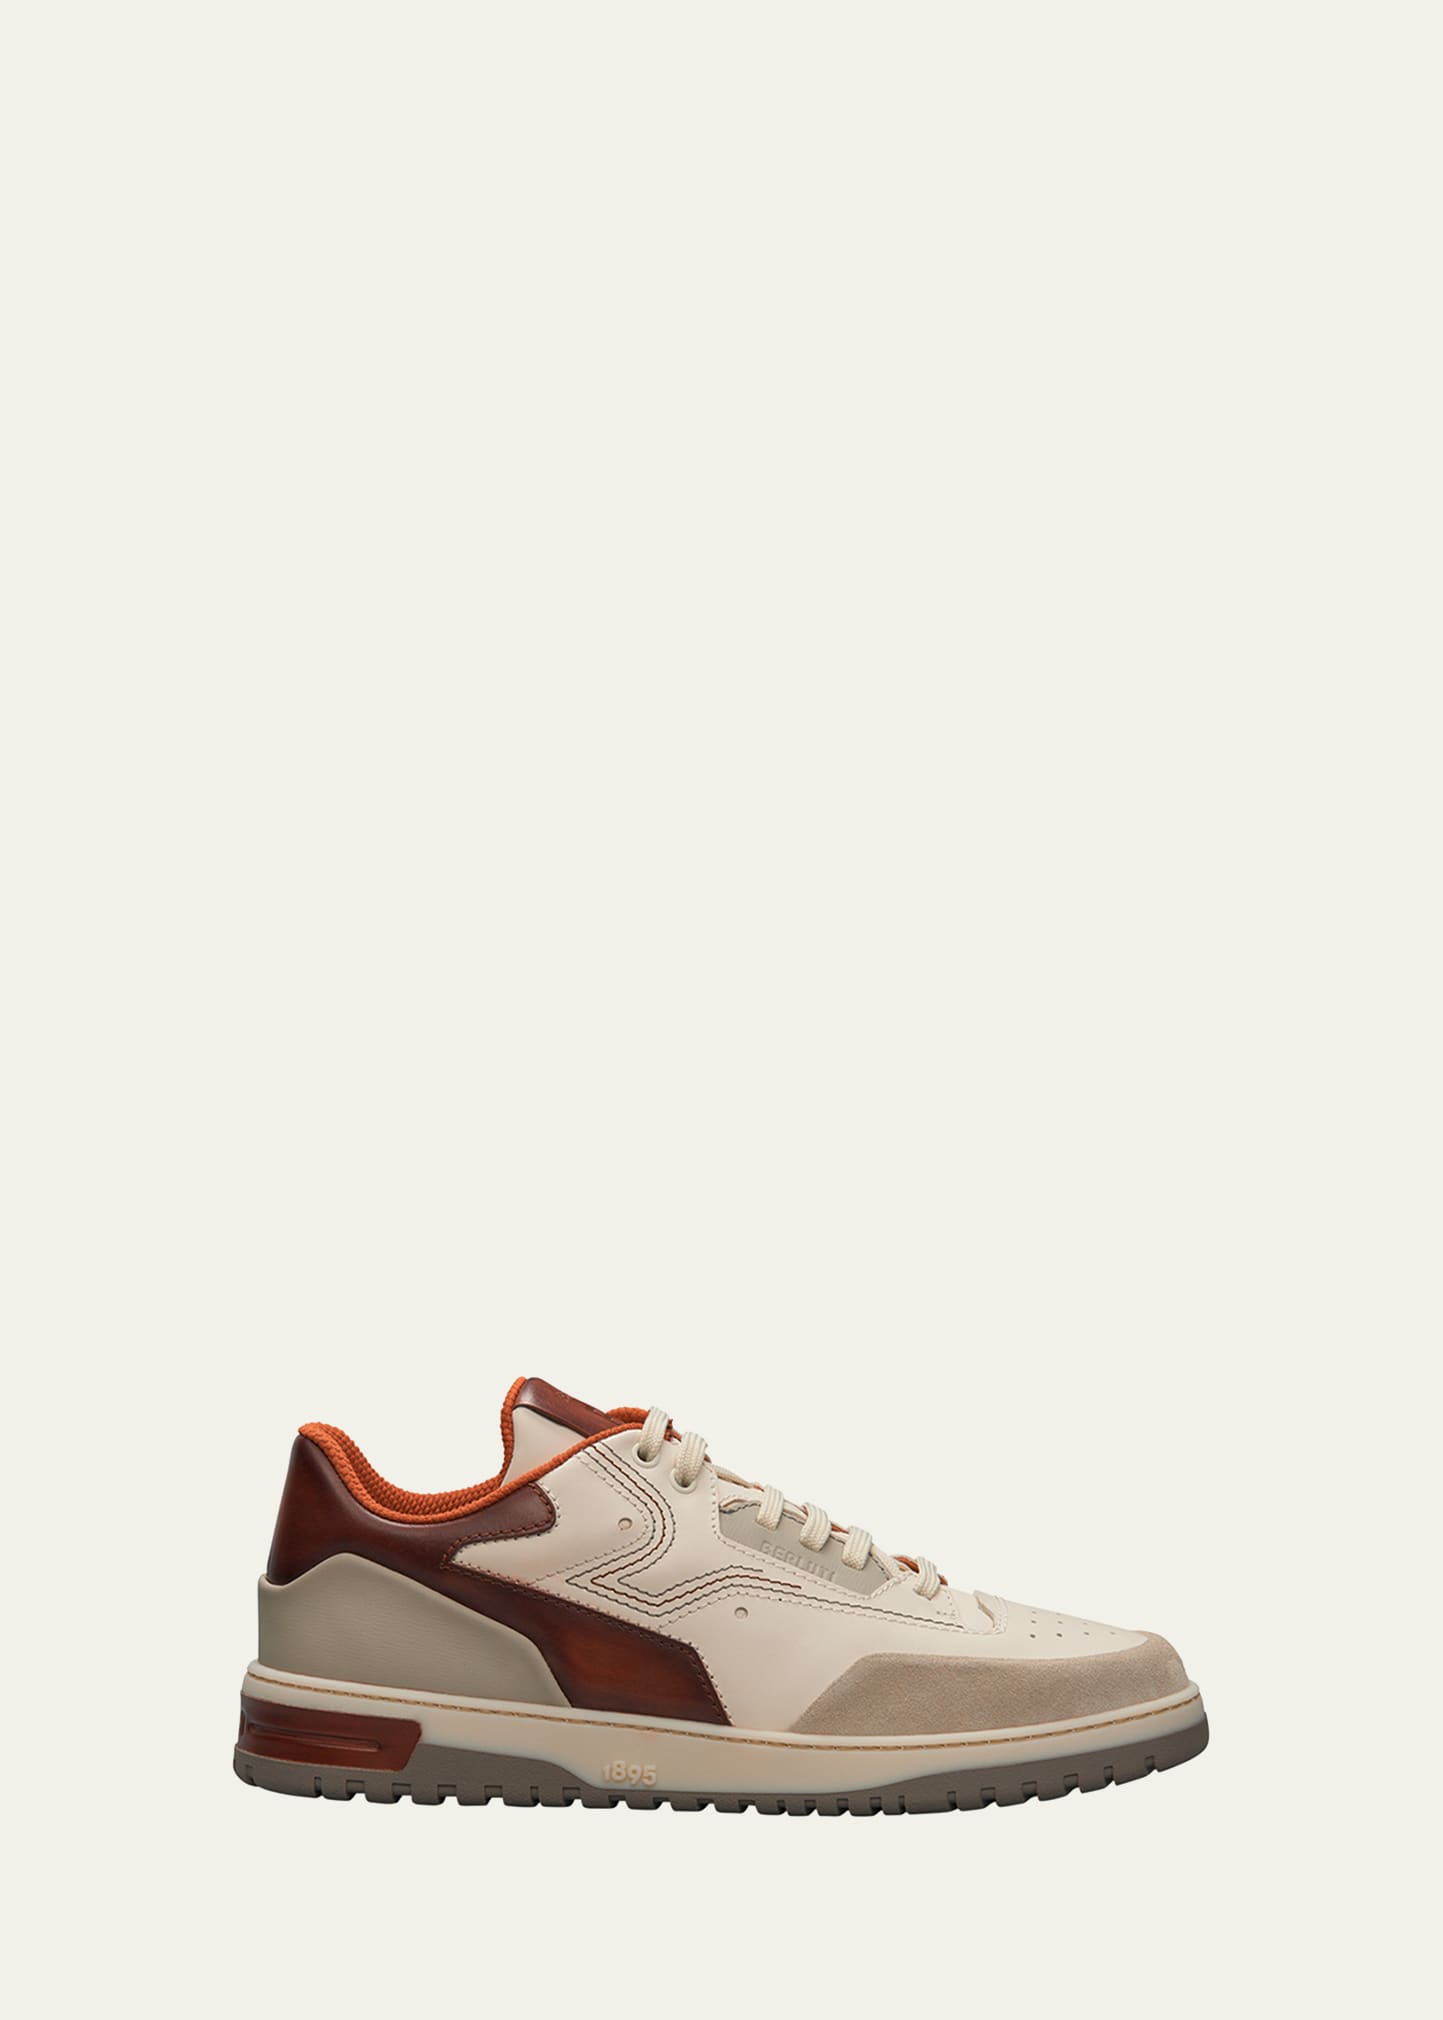 Men's Playoff Leather Low-Top Sneakers